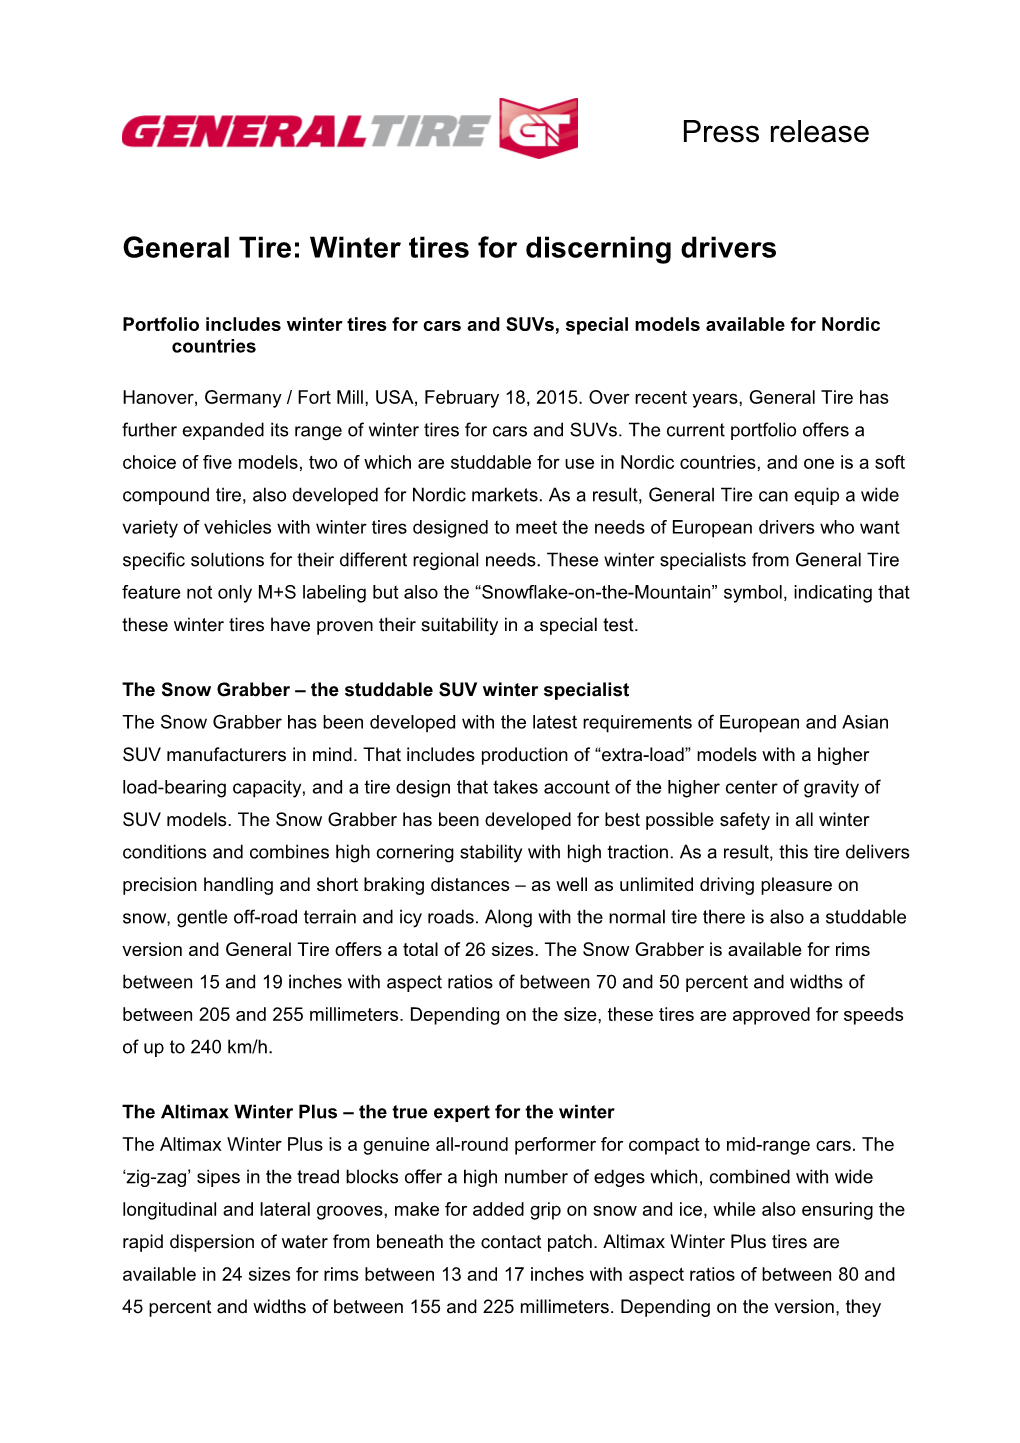 General Tire: Winter Tires for Discerning Drivers